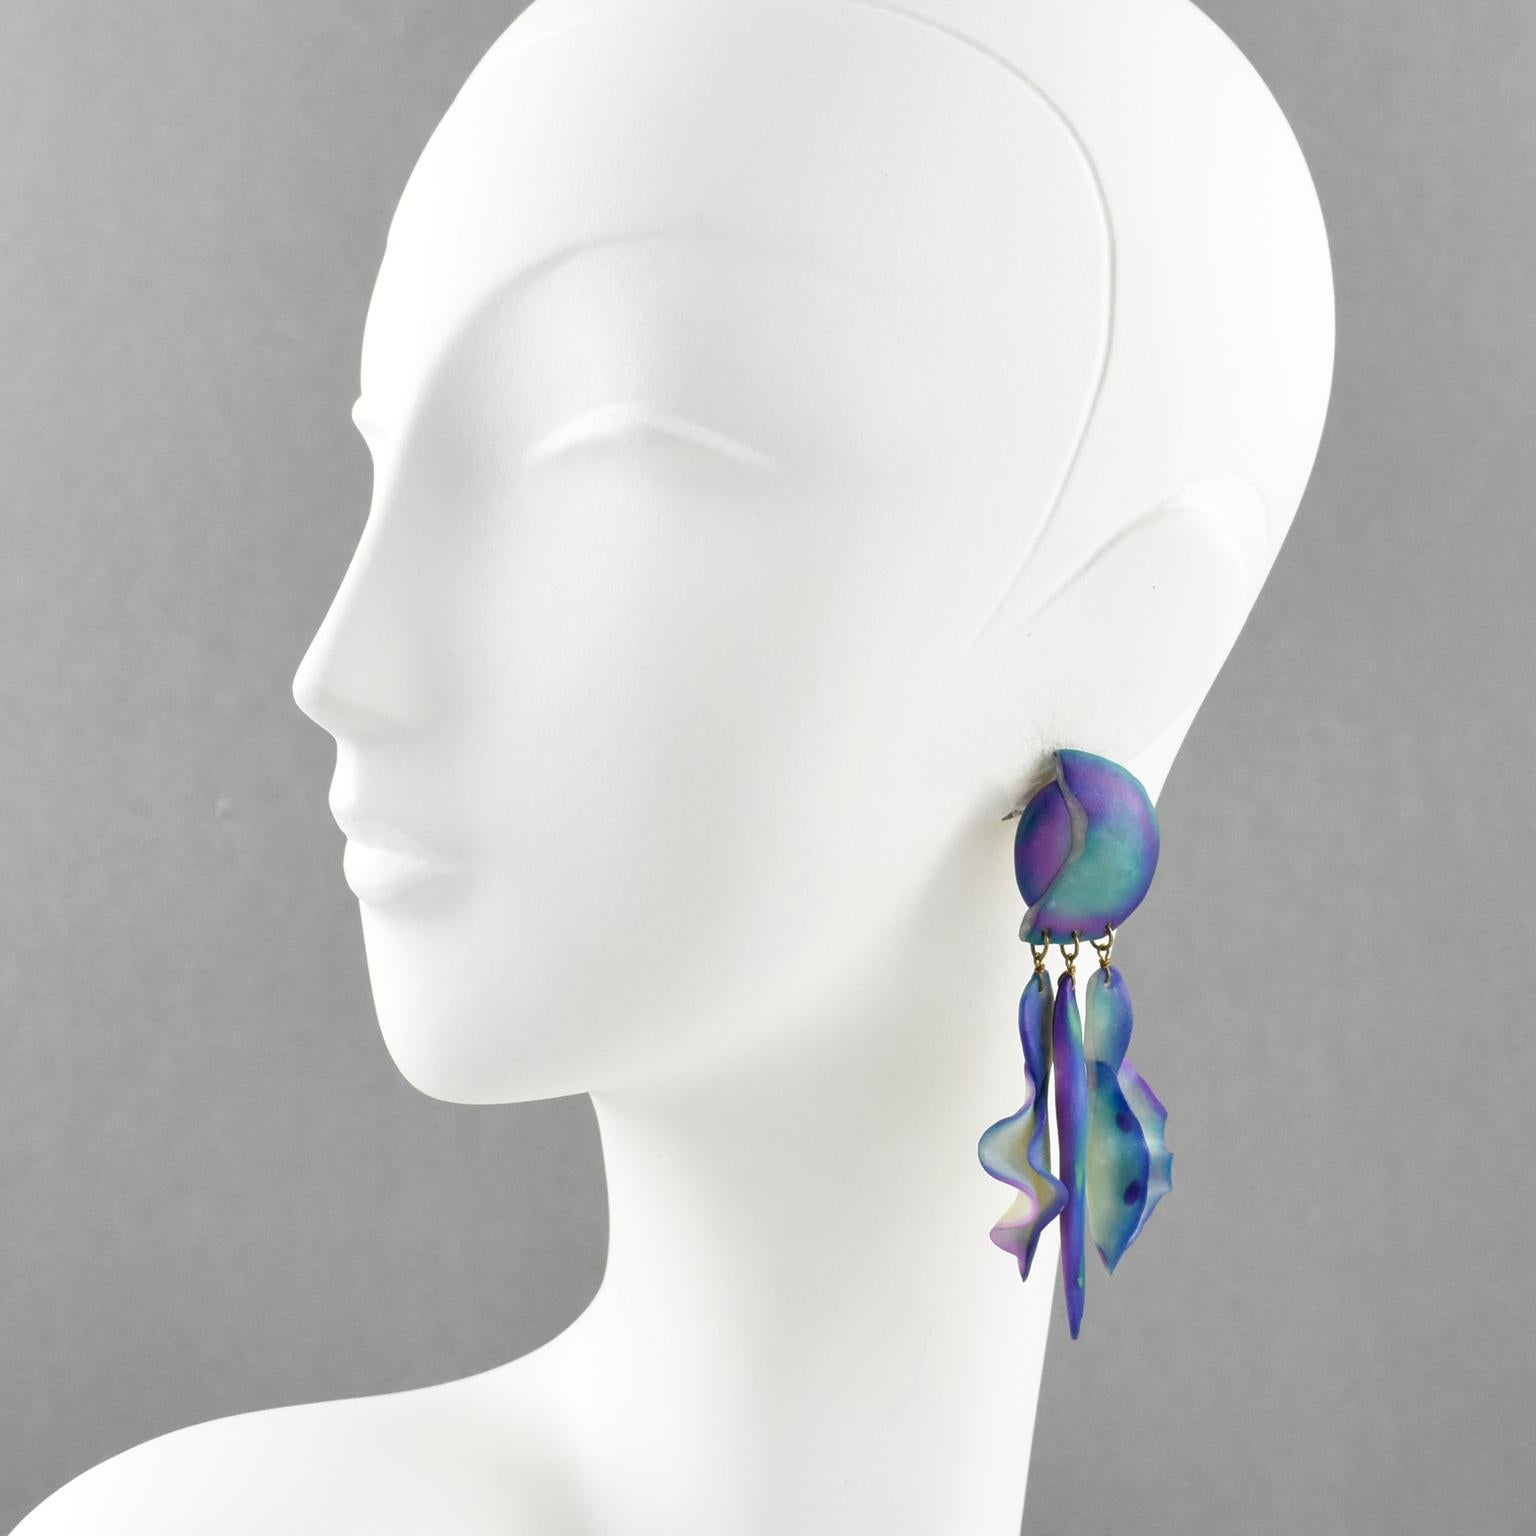 Stunning extra-long Resin pierced earrings. They feature futuristic dangling drop designs with carved shapes and an organic feel. Assorted colors of blue, turquoise, and purple with a shaded pattern. There is no visible maker's mark. They are made